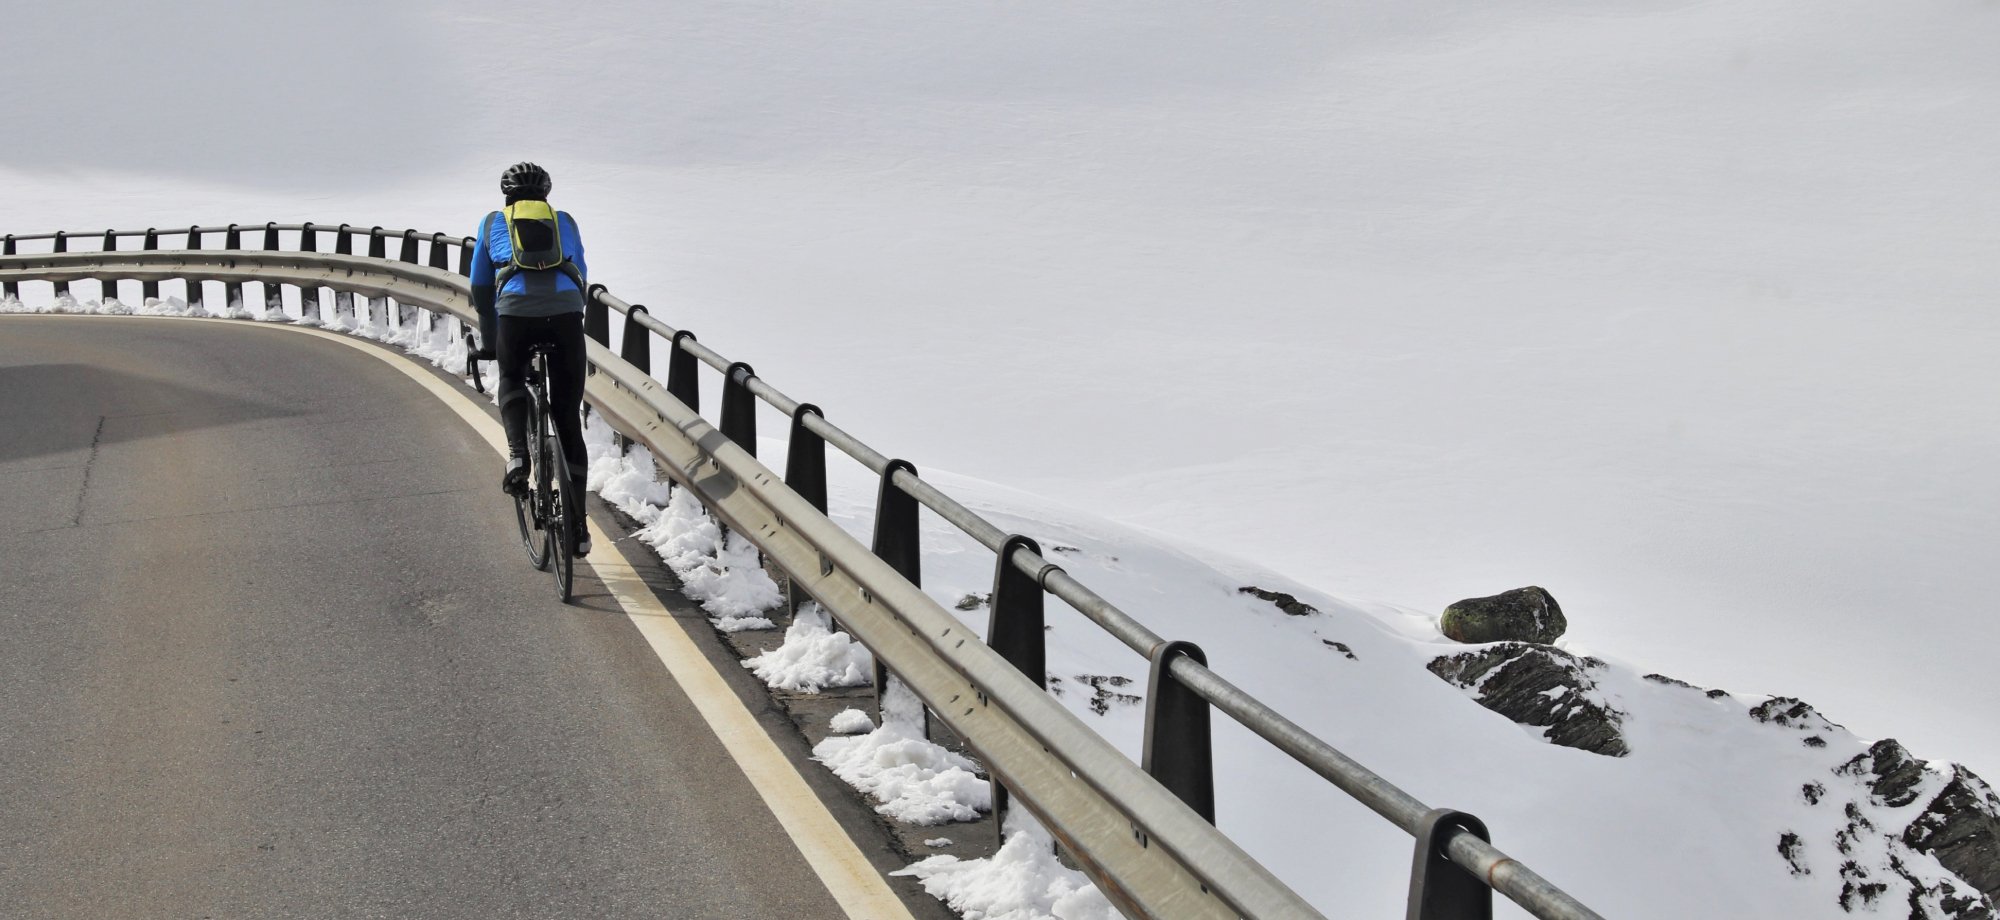 Cyclist riding a bike on snowy road with cold tires